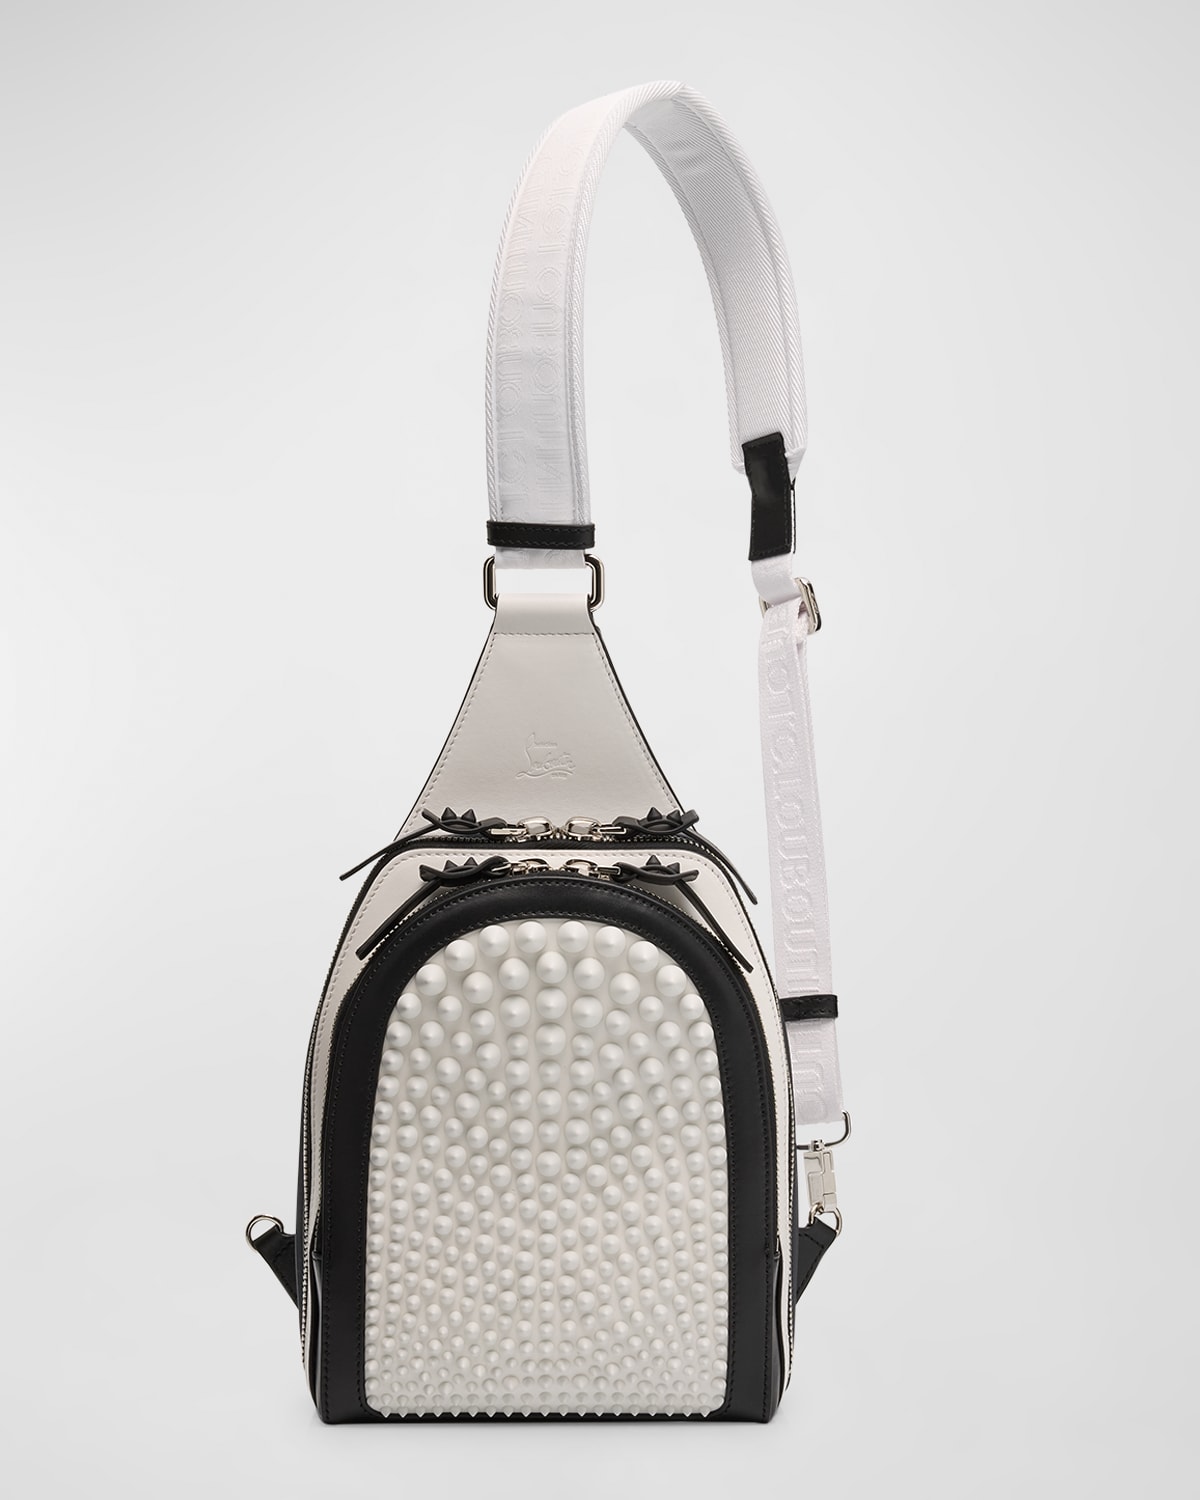 Christian Louboutin Men's Loubifunk Spikes Leather Sling Backpack In White